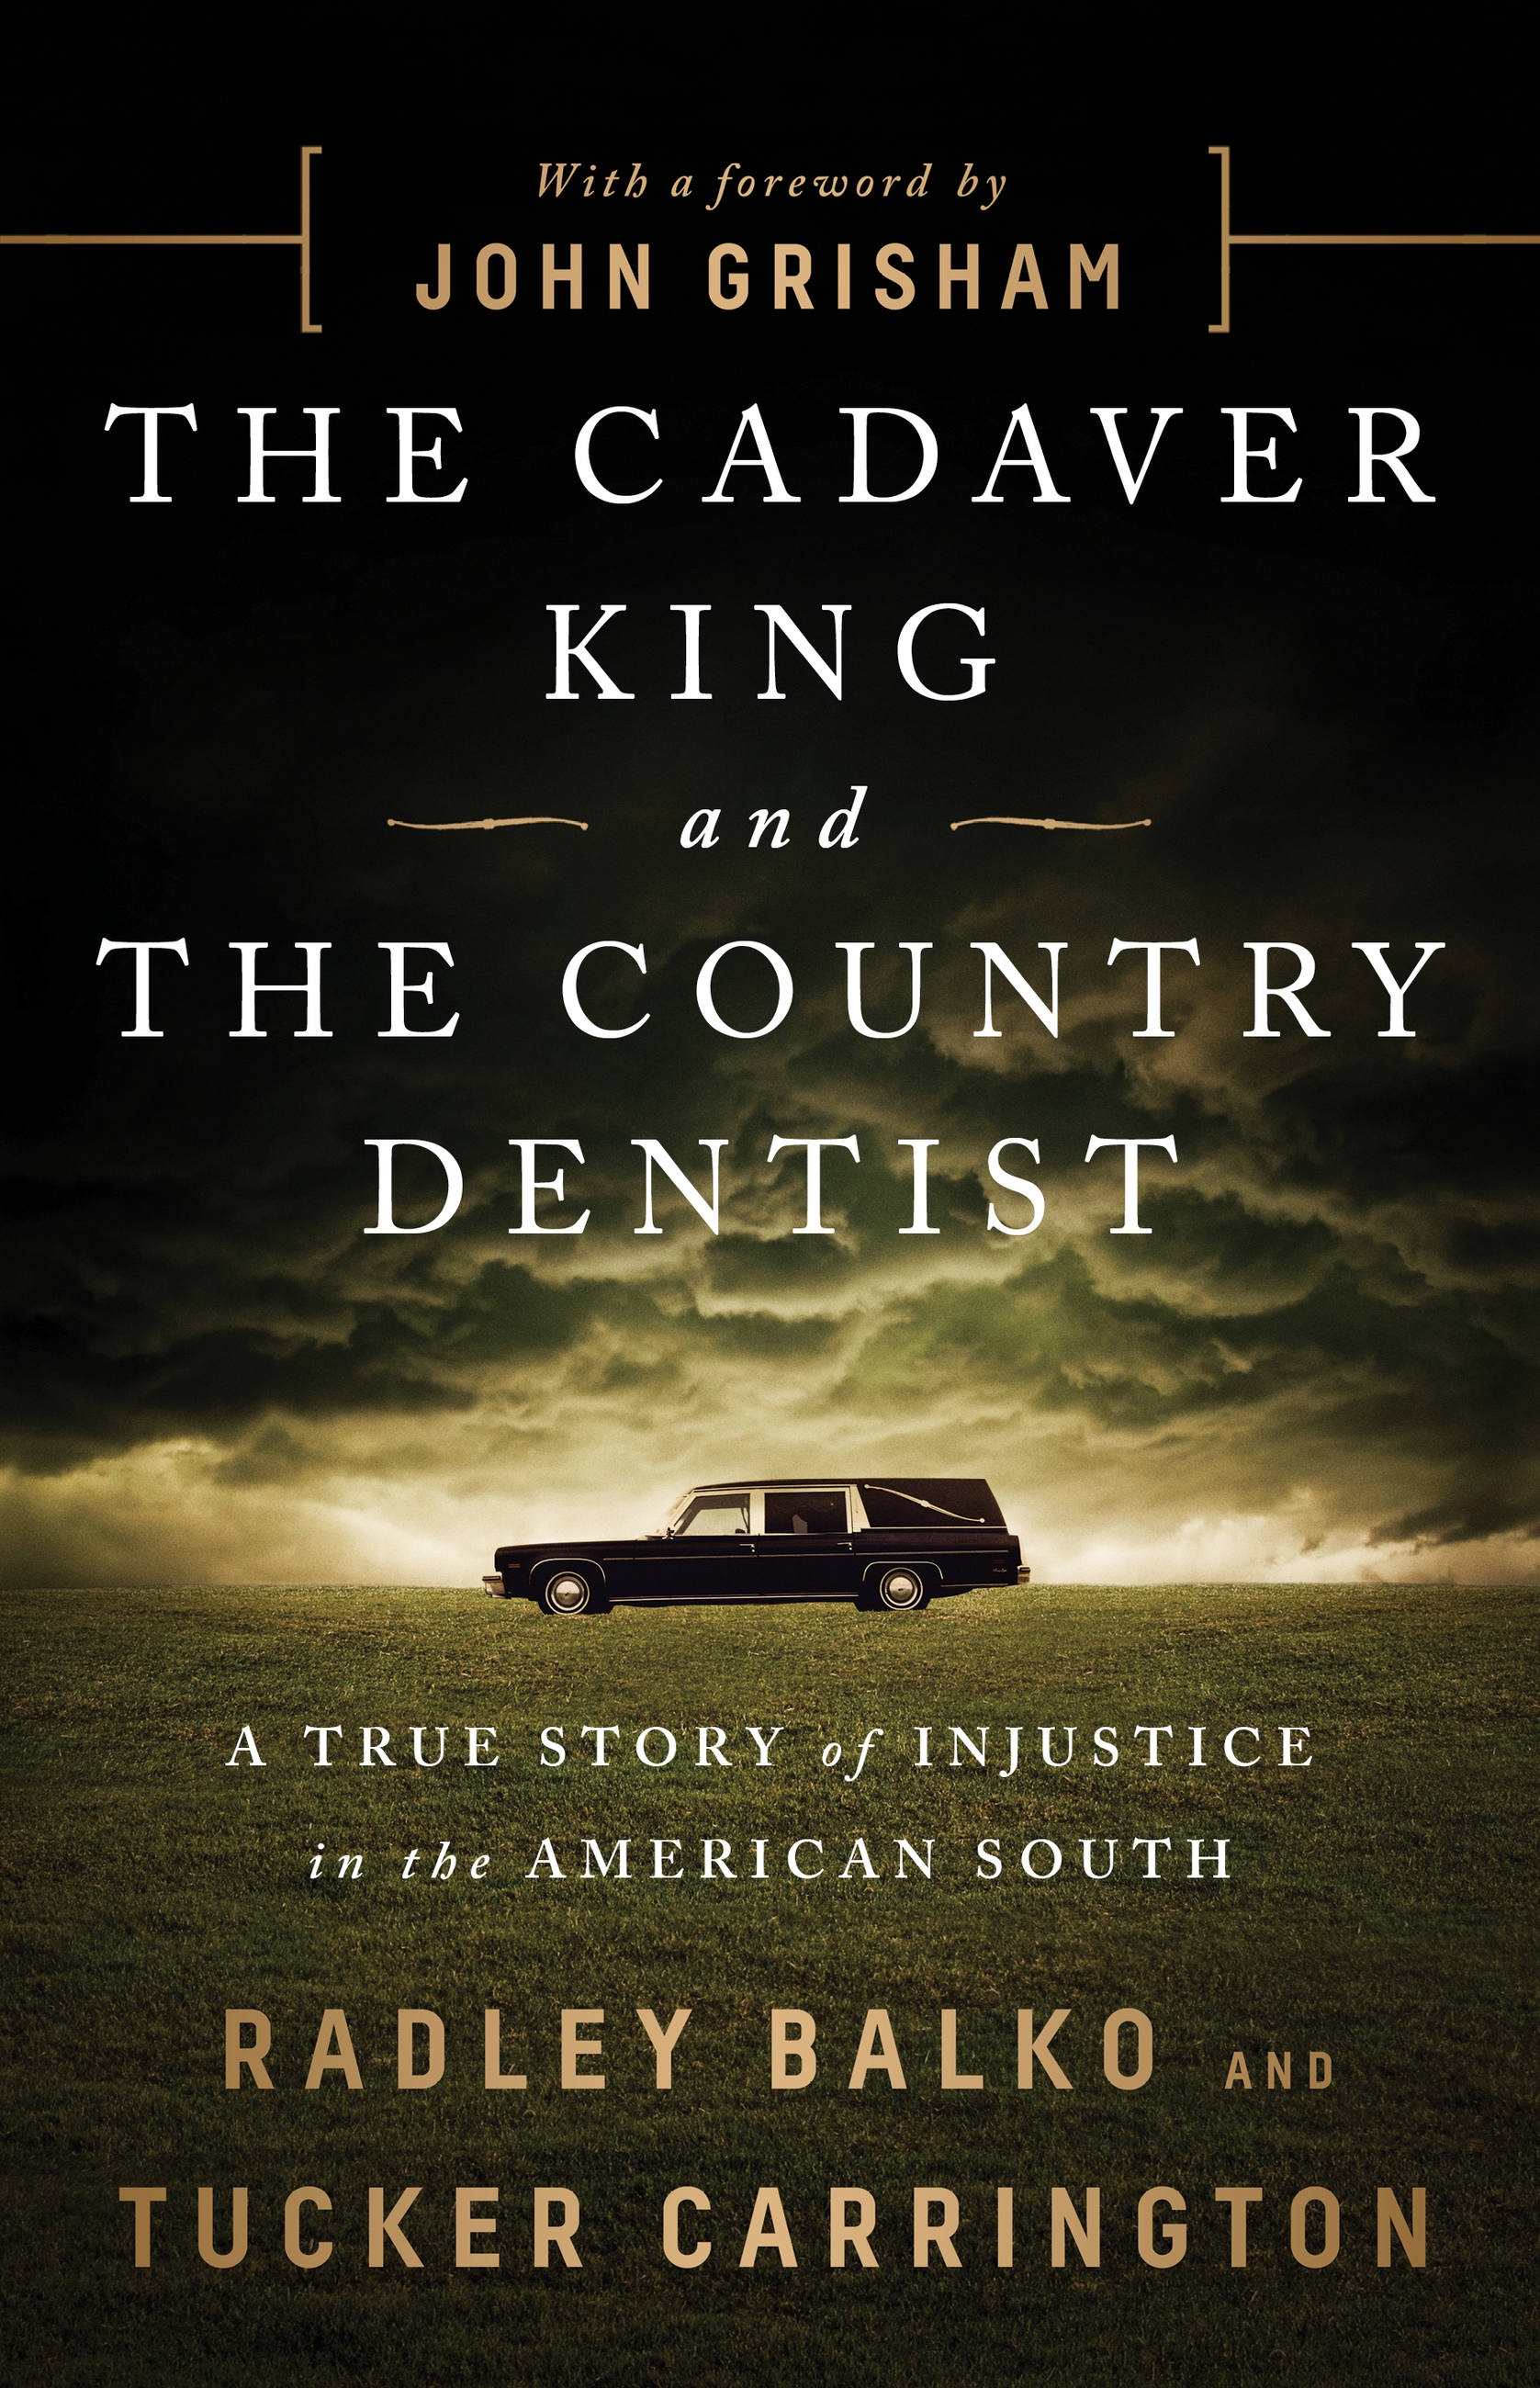 Image de couverture de The Cadaver King and the Country Dentist [electronic resource] : A True Story of Injustice in the American South